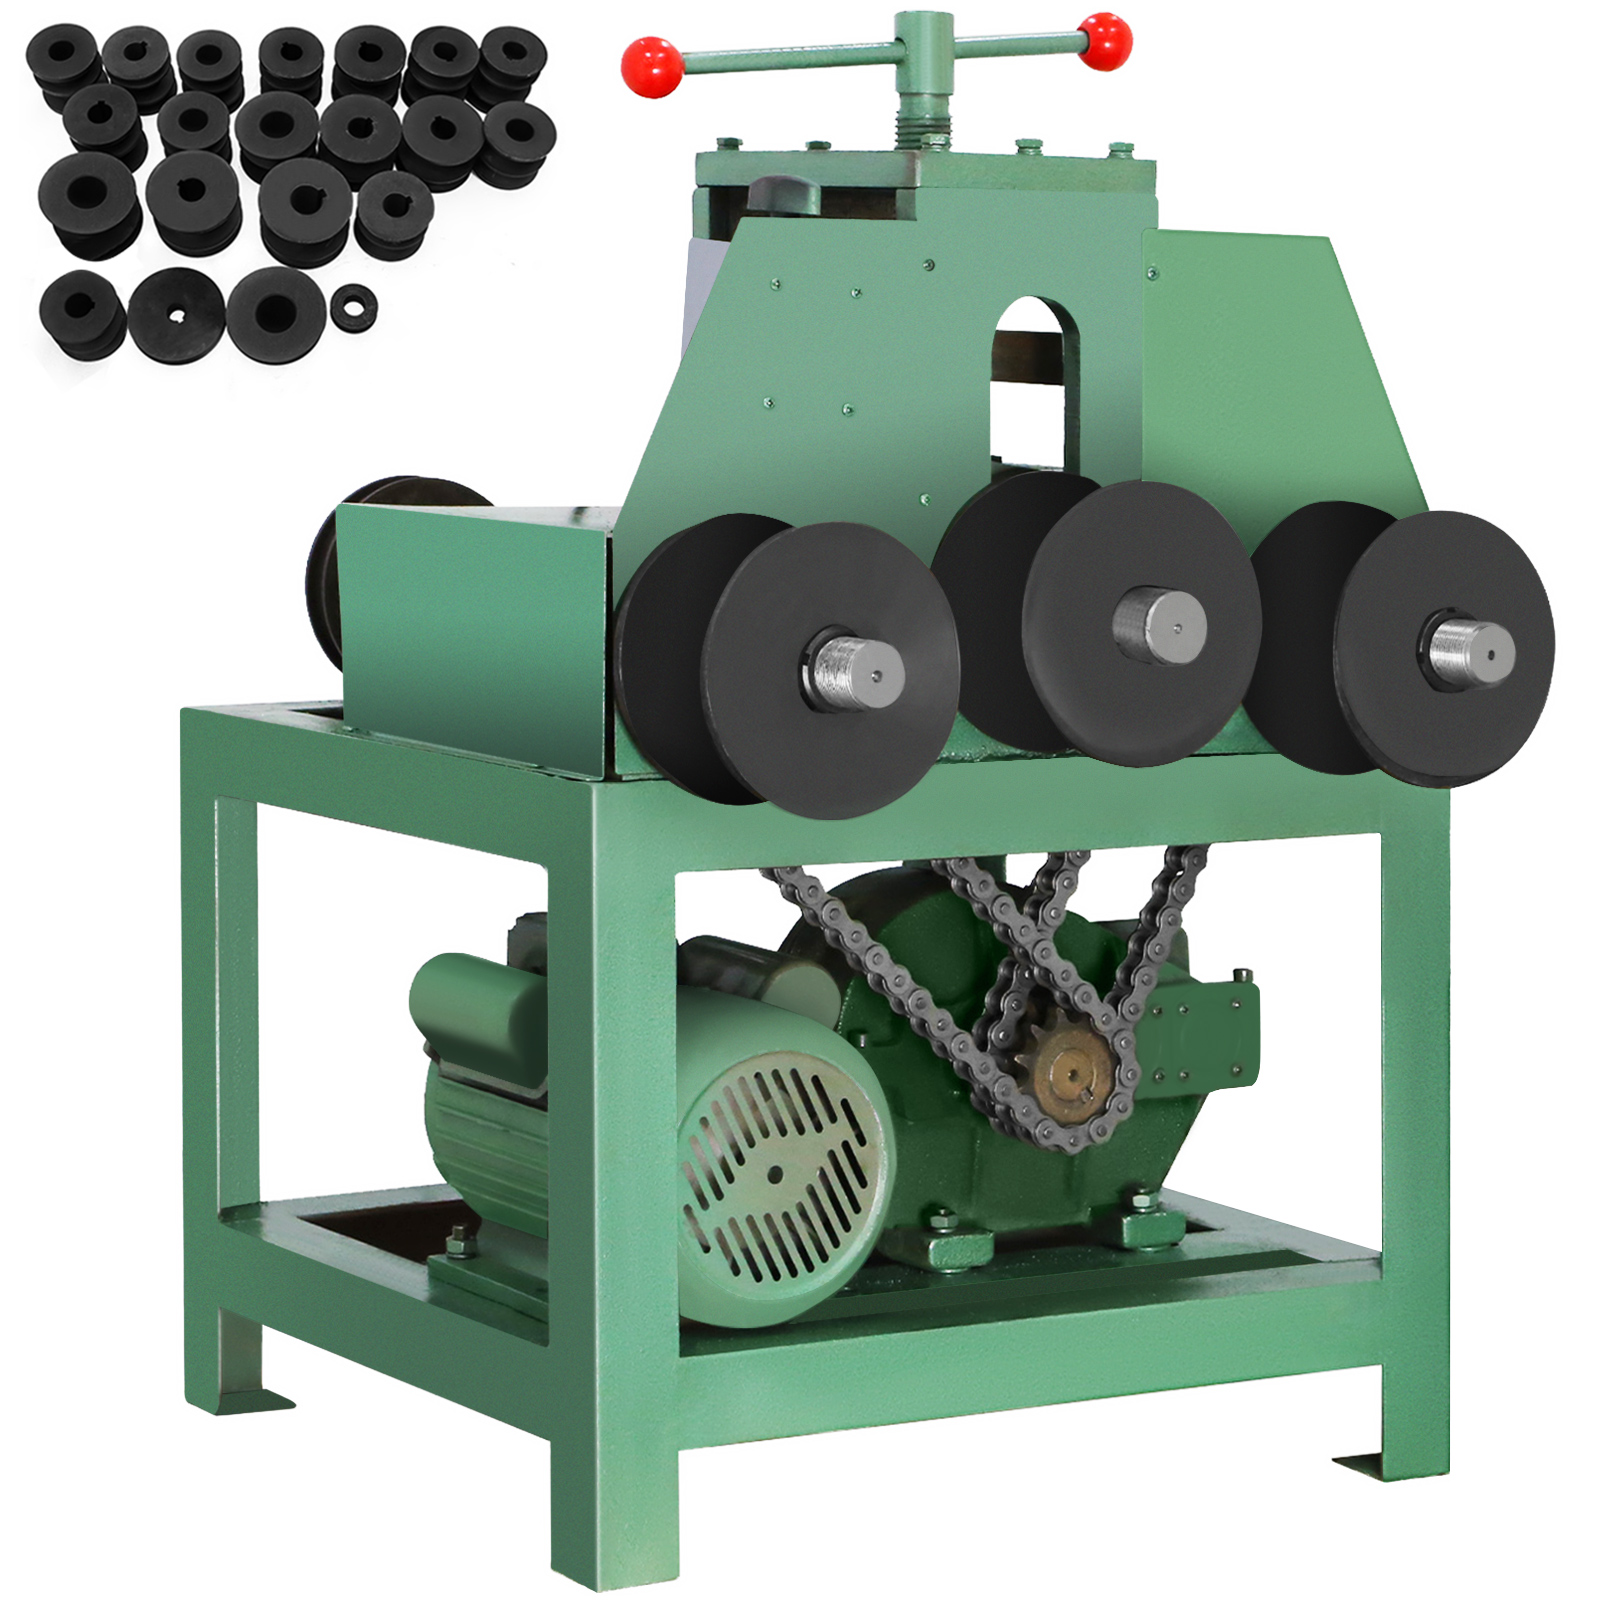 Electric Pipe Tube Bender With 9 Round And 8 Square Die Set (5/8"-3") W-g76 от Vevor Many GEOs